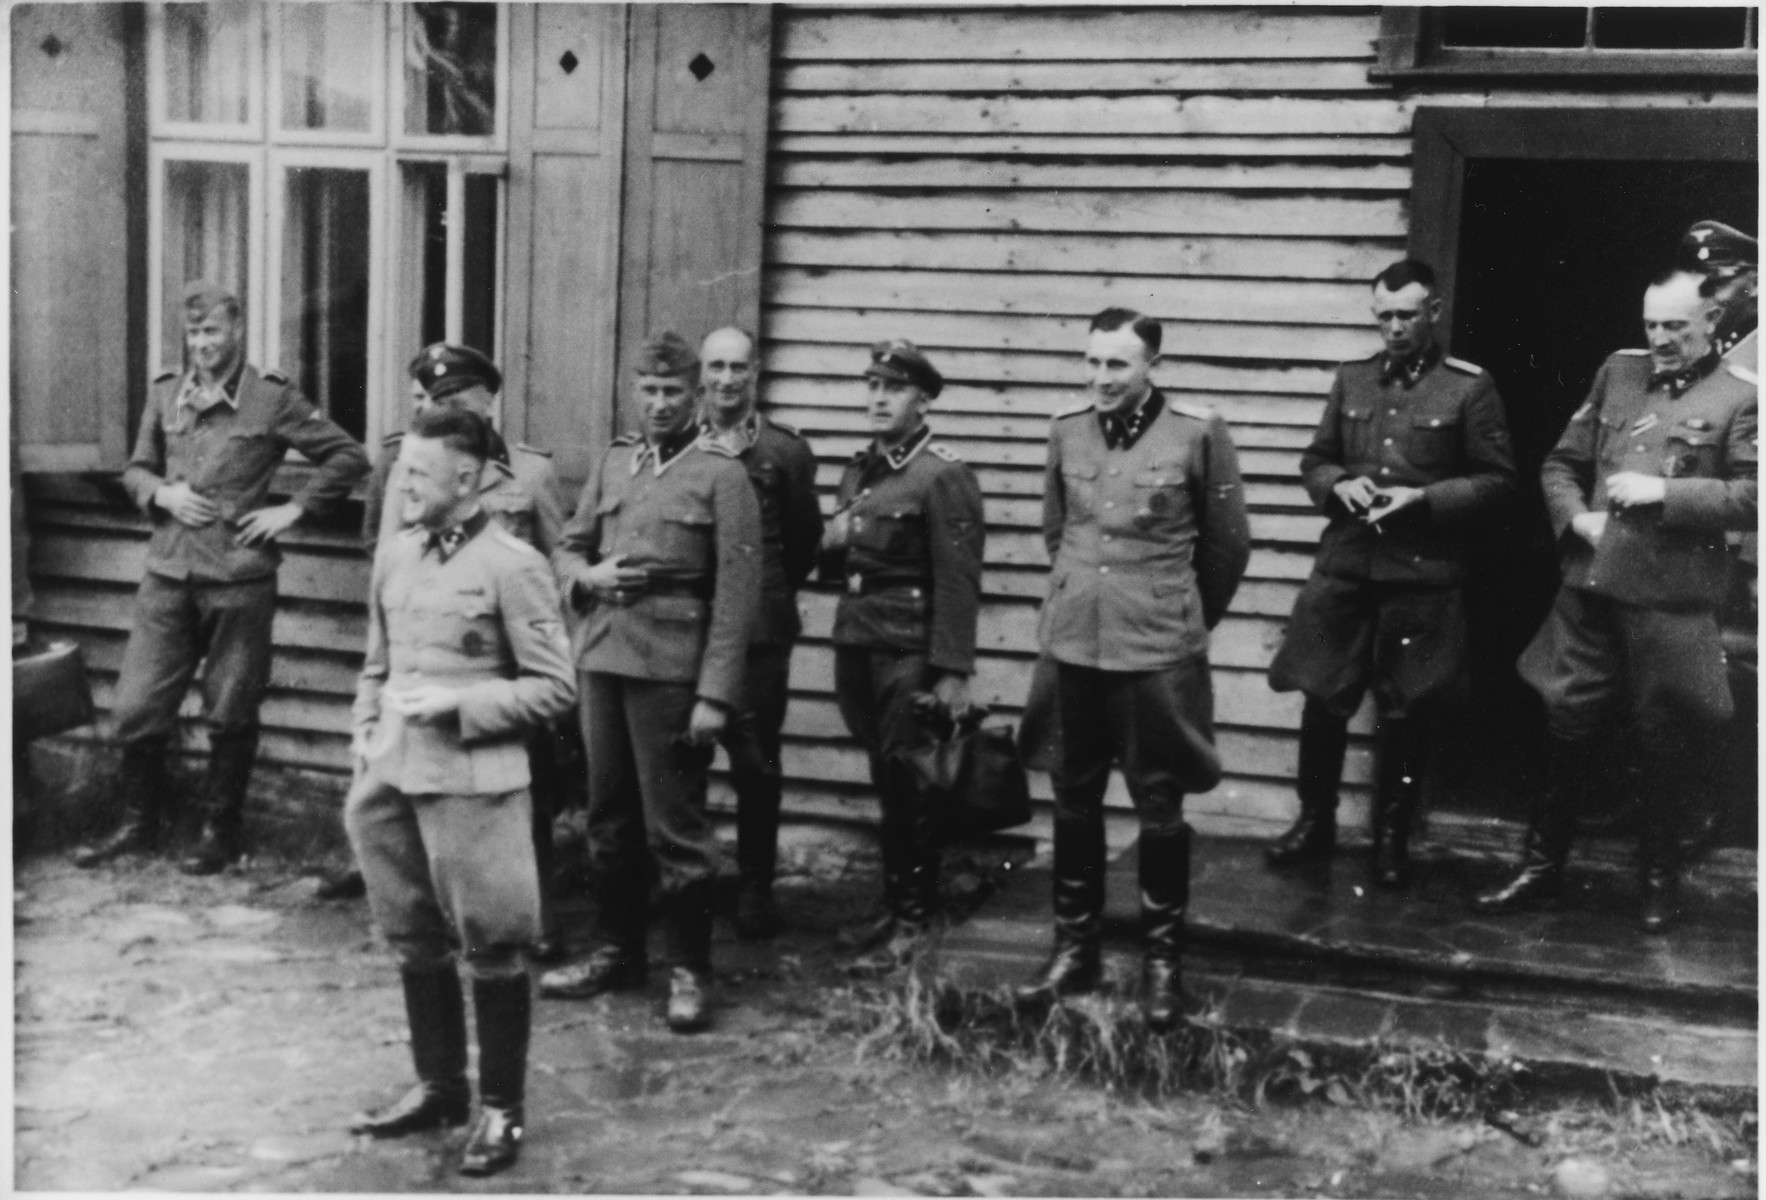 Group portrait of Nazi officers standing in front of a building in Solahutte, the SS retreat outside of Auschwitz.

Among those pictured are Franz Hoessler (front) and Karl Hoecker (third from the right).  Also pictured on the far right is SS-Obersturmführer Max Sell (served from 1943 to1945 first Arbeitseinsatzführer in Auschwitz and afterwards in Mittelbau-Dora.)  Also pictured in the back center is  scha. Hermann Baltasar Buch (30.12.1896-10.07.1959).  From 1943 until September 1944 Buch was in charge of the crematory IV in Birkenau.

[Based on the officers visiting Solahutte, we surmise that the photographs were taken to honor Rudolf Hoess who completed his tenure as garrison senior on July 29.]